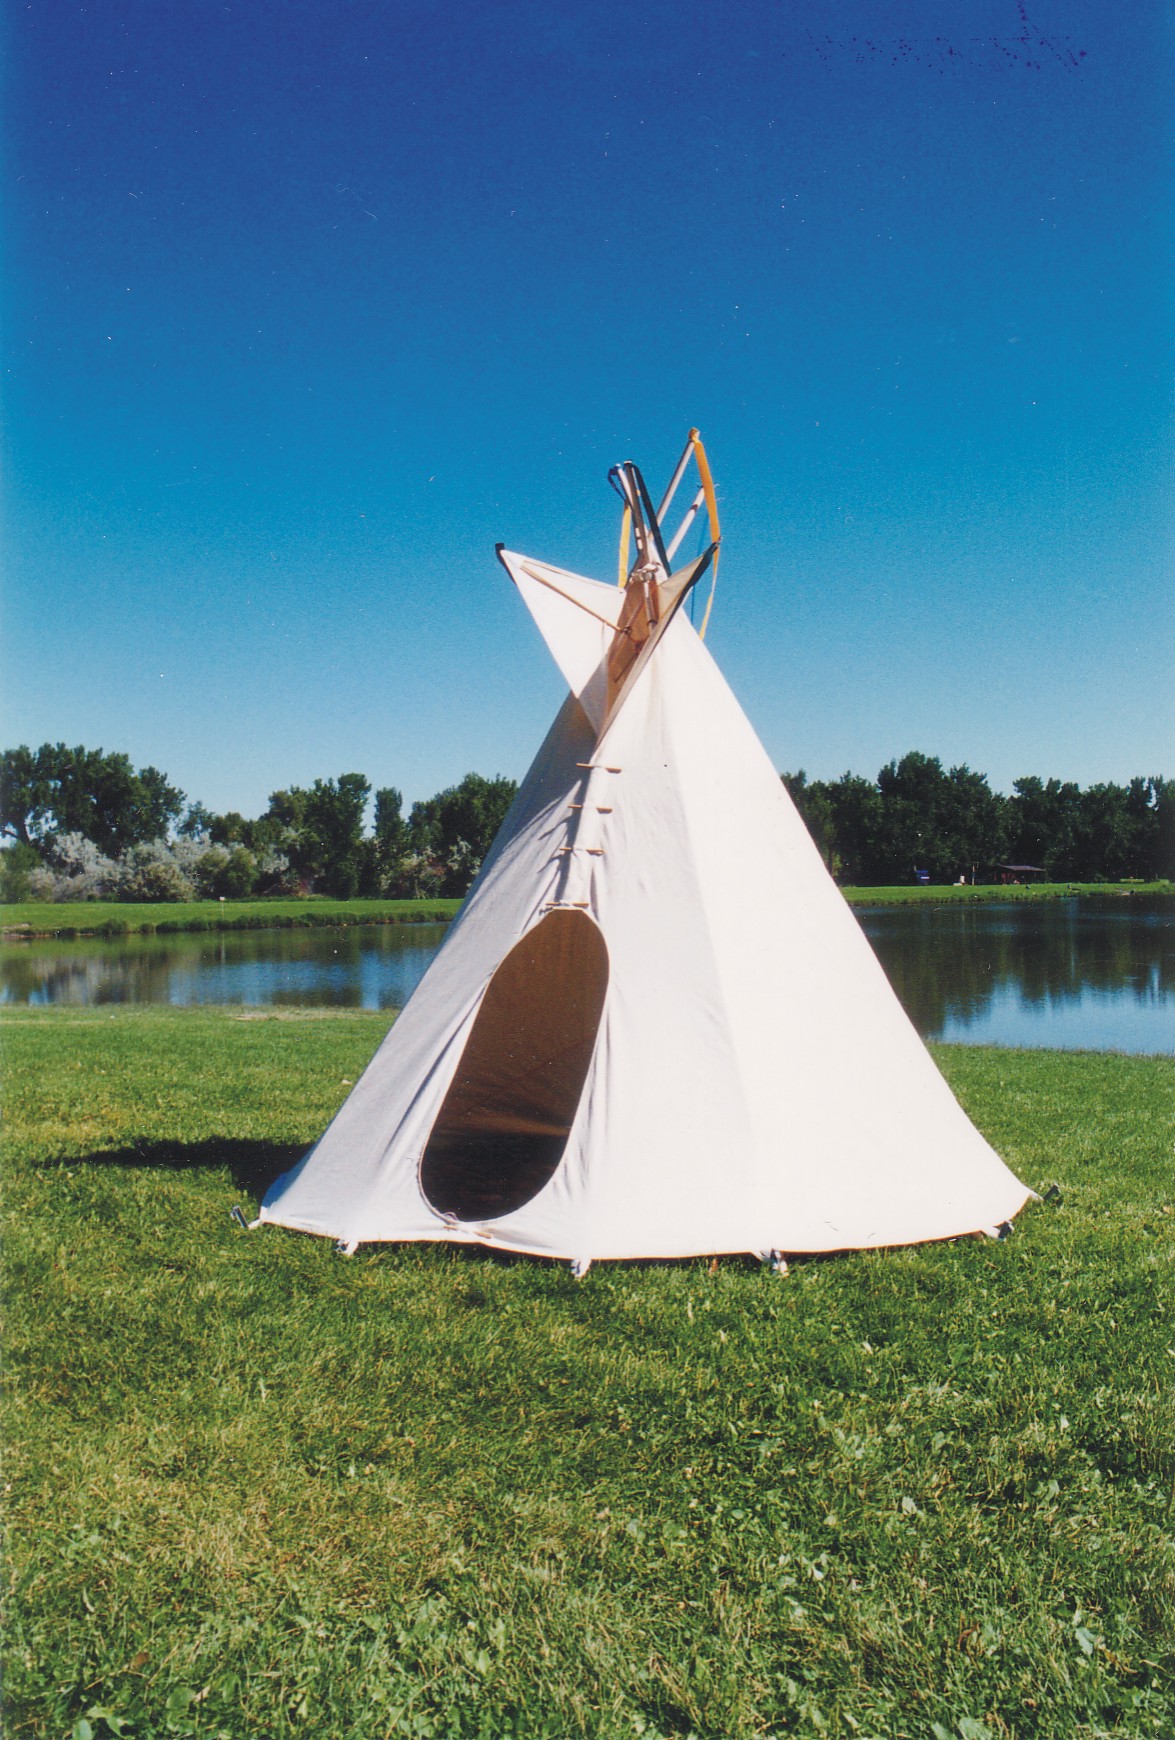 Images of Tipi | 1175x1740